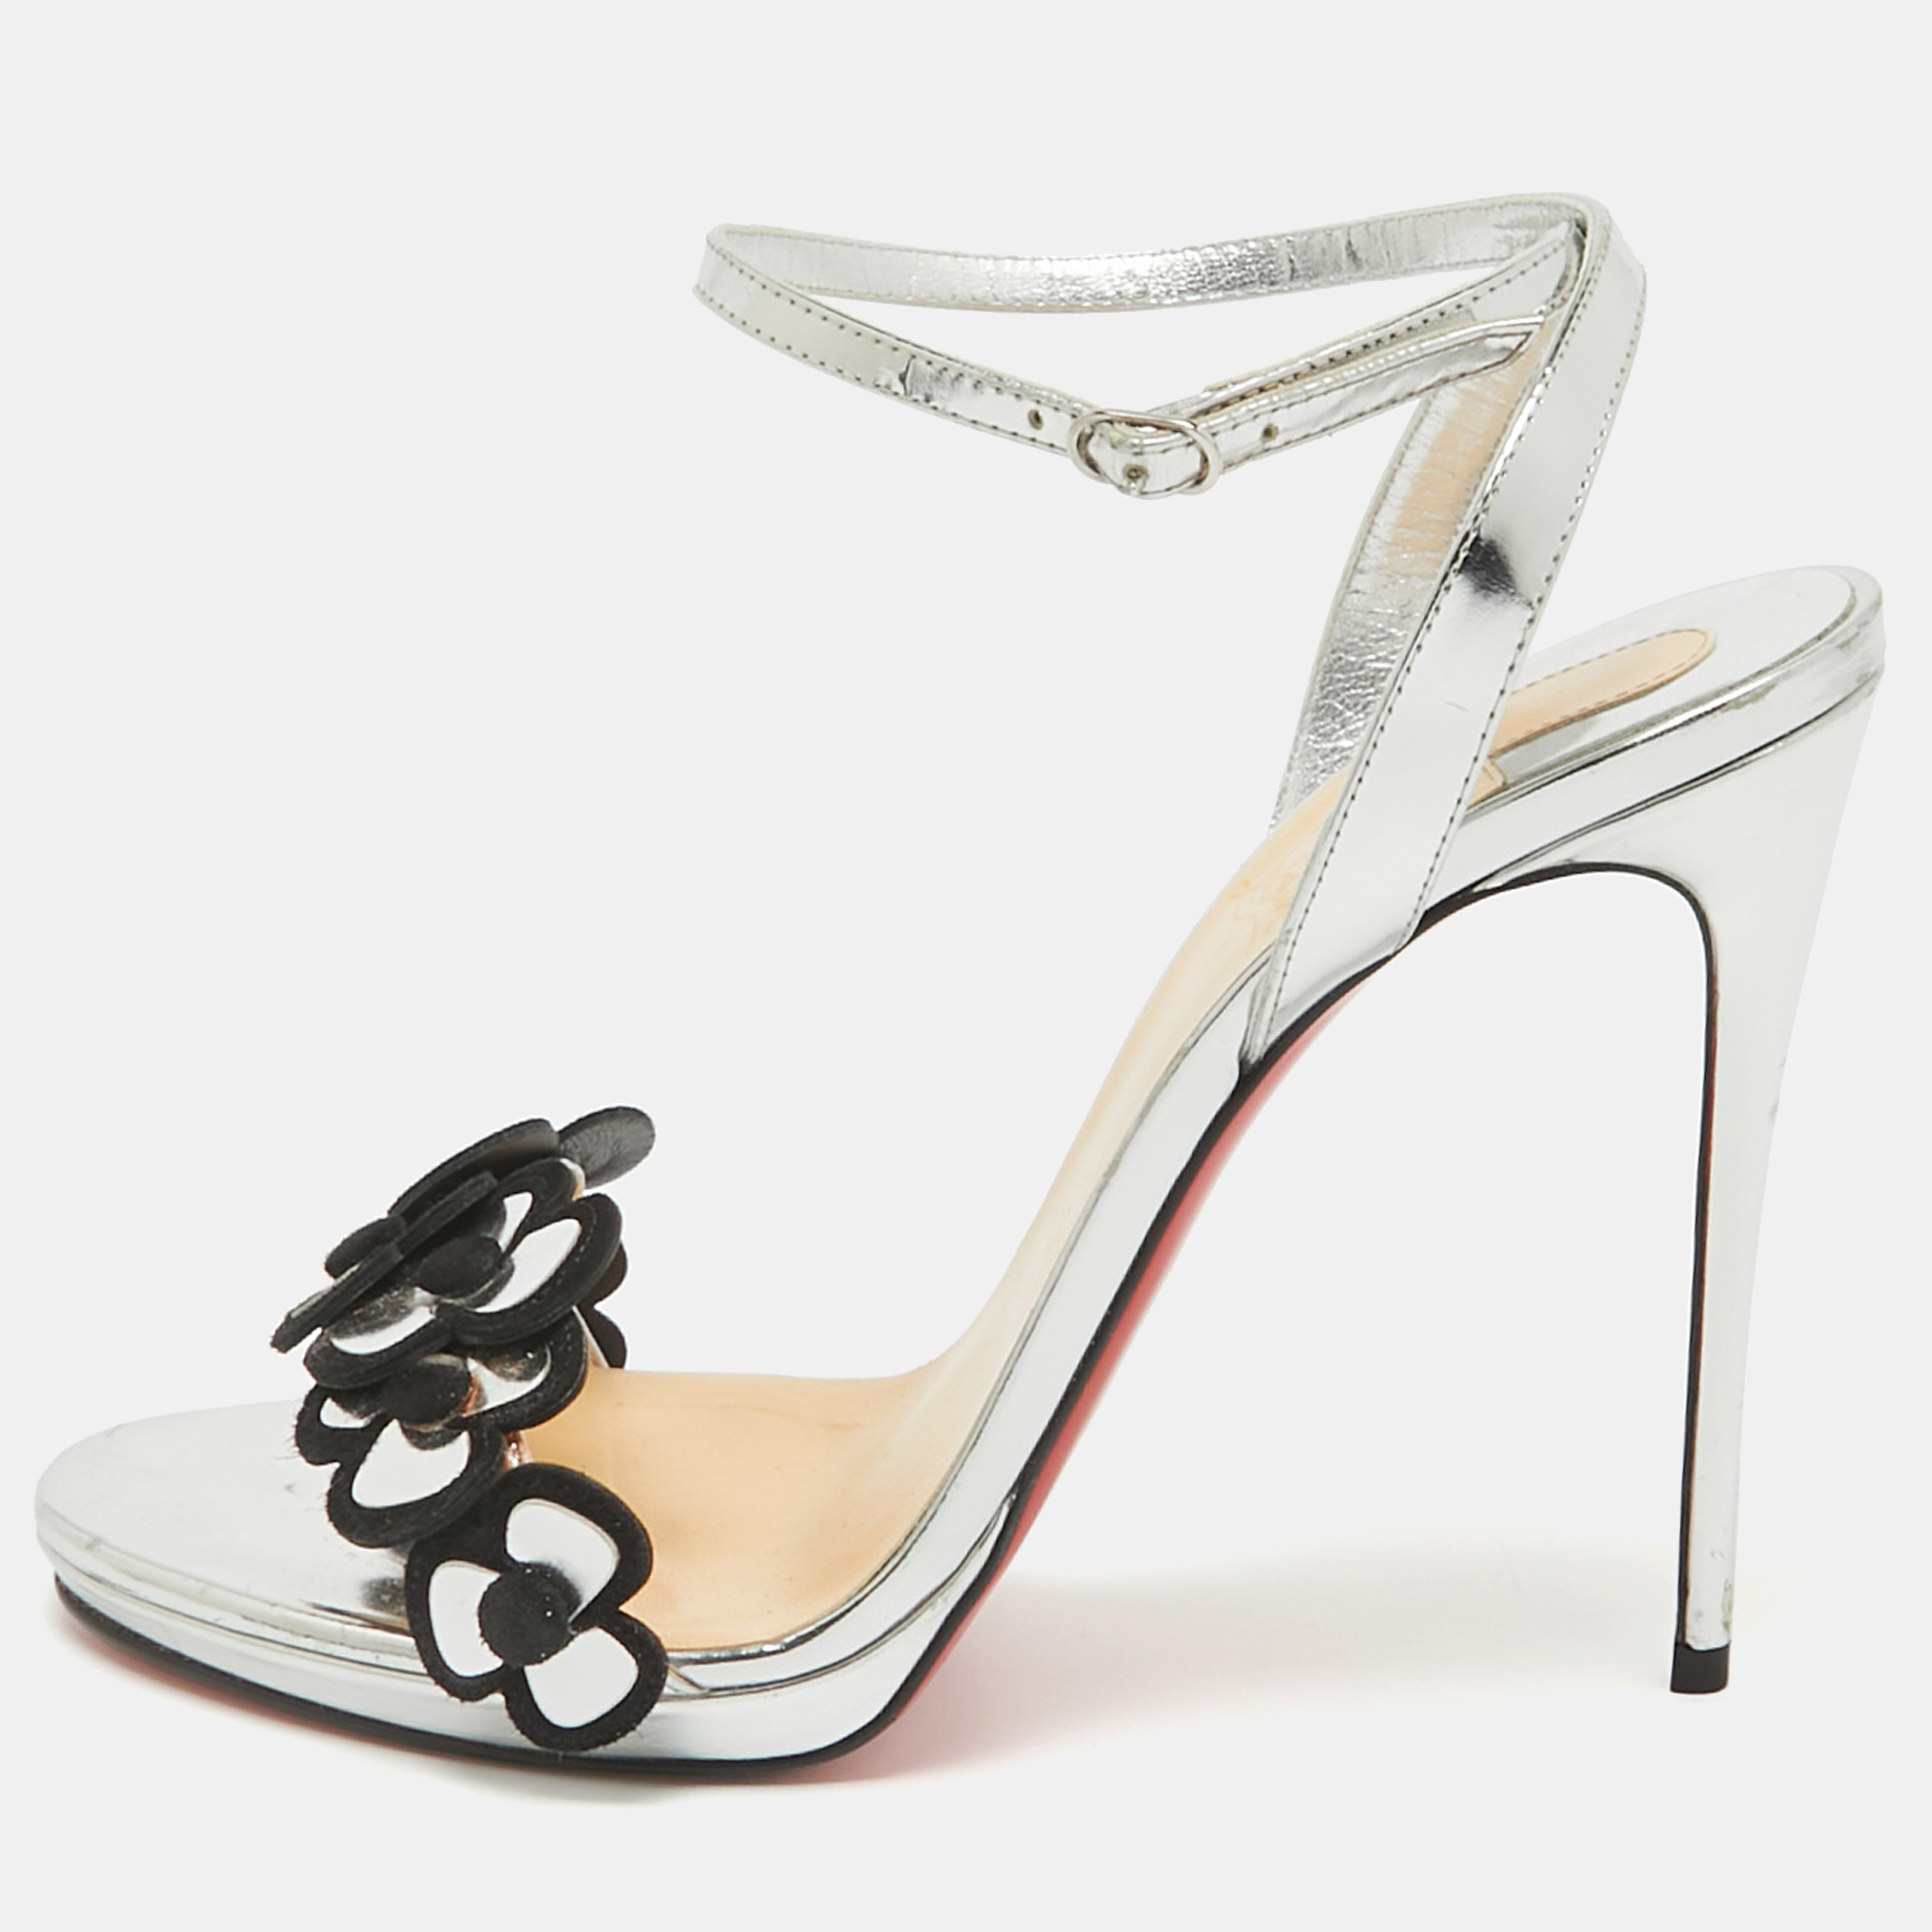 Christian louboutin silver leather pansy queen sandals size 39.5